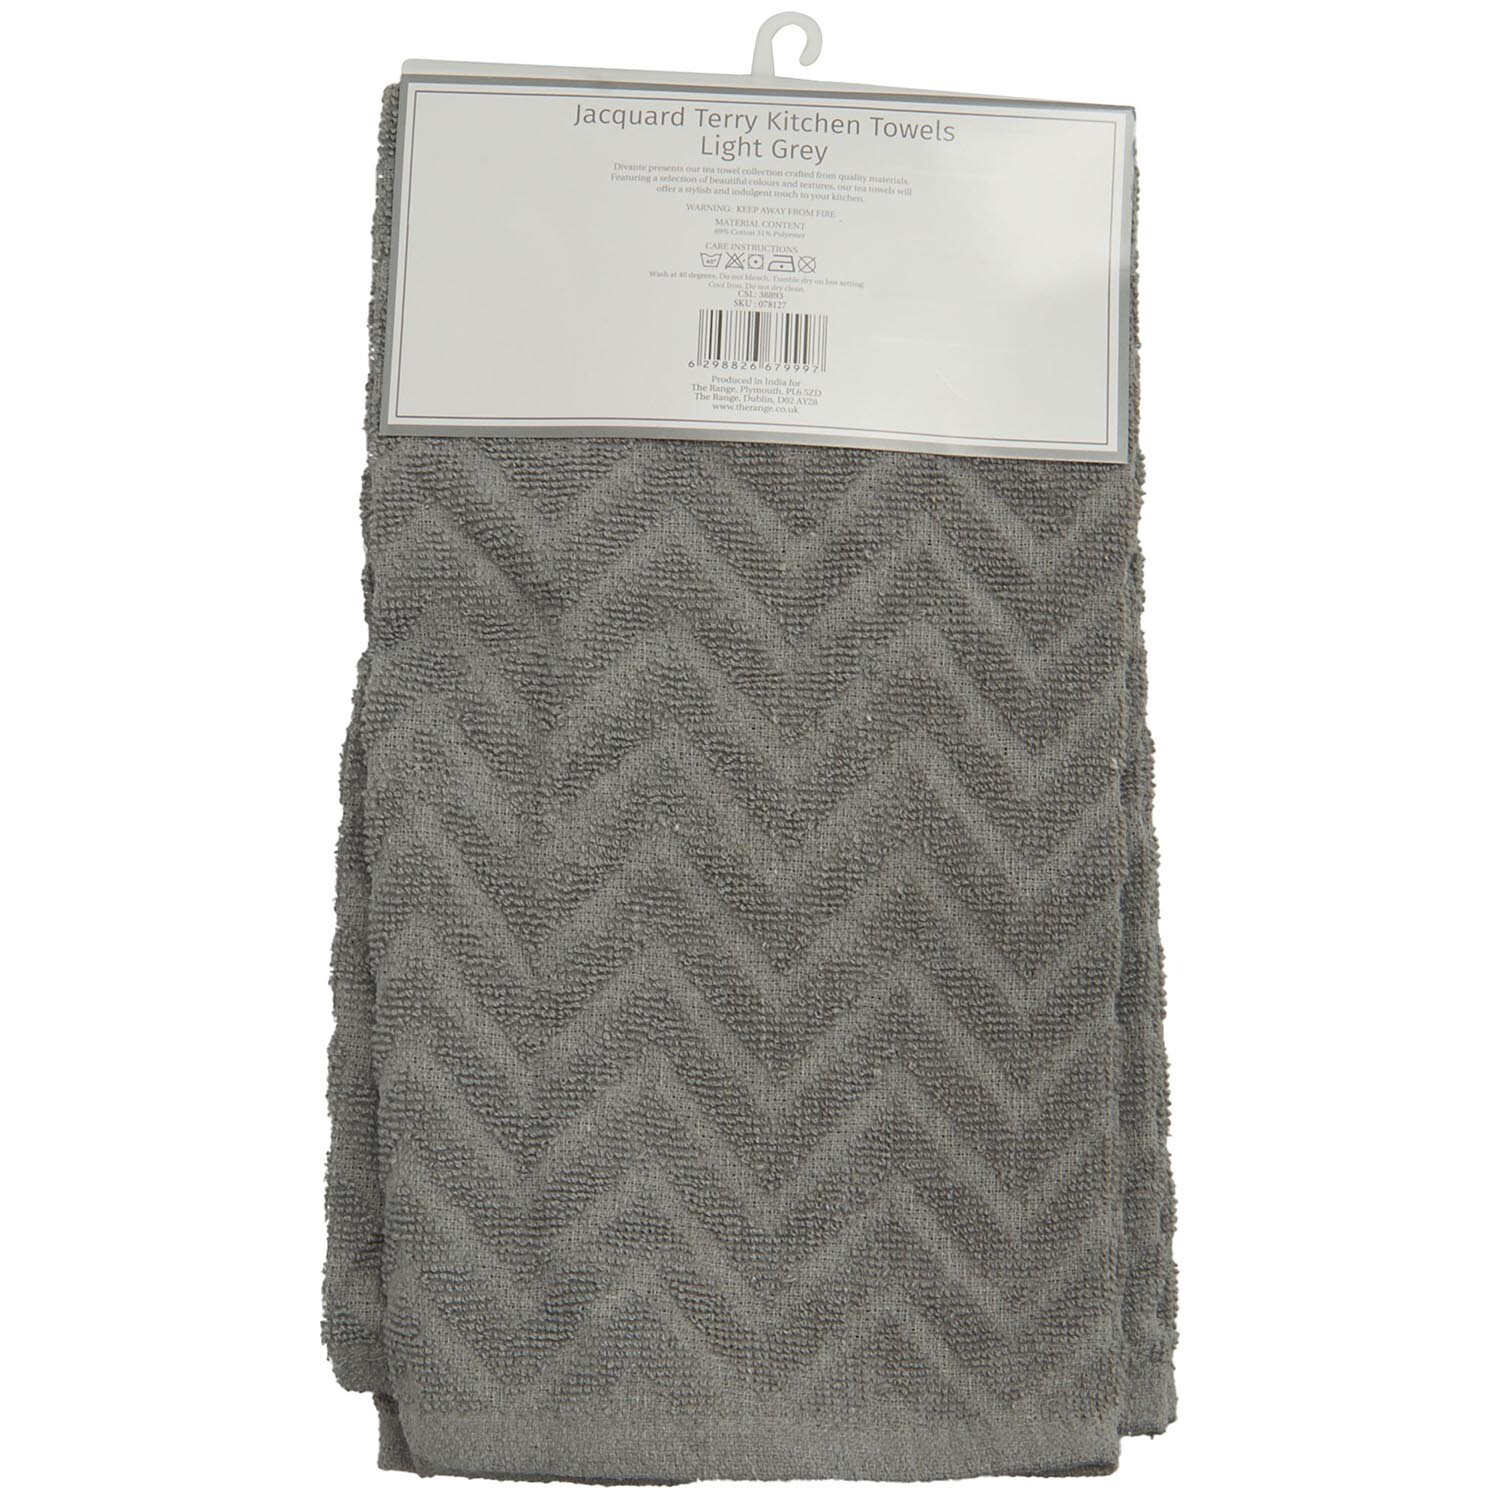 Pack of 2 Jacquard Terry Kitchen Towels - Light Grey Image 2